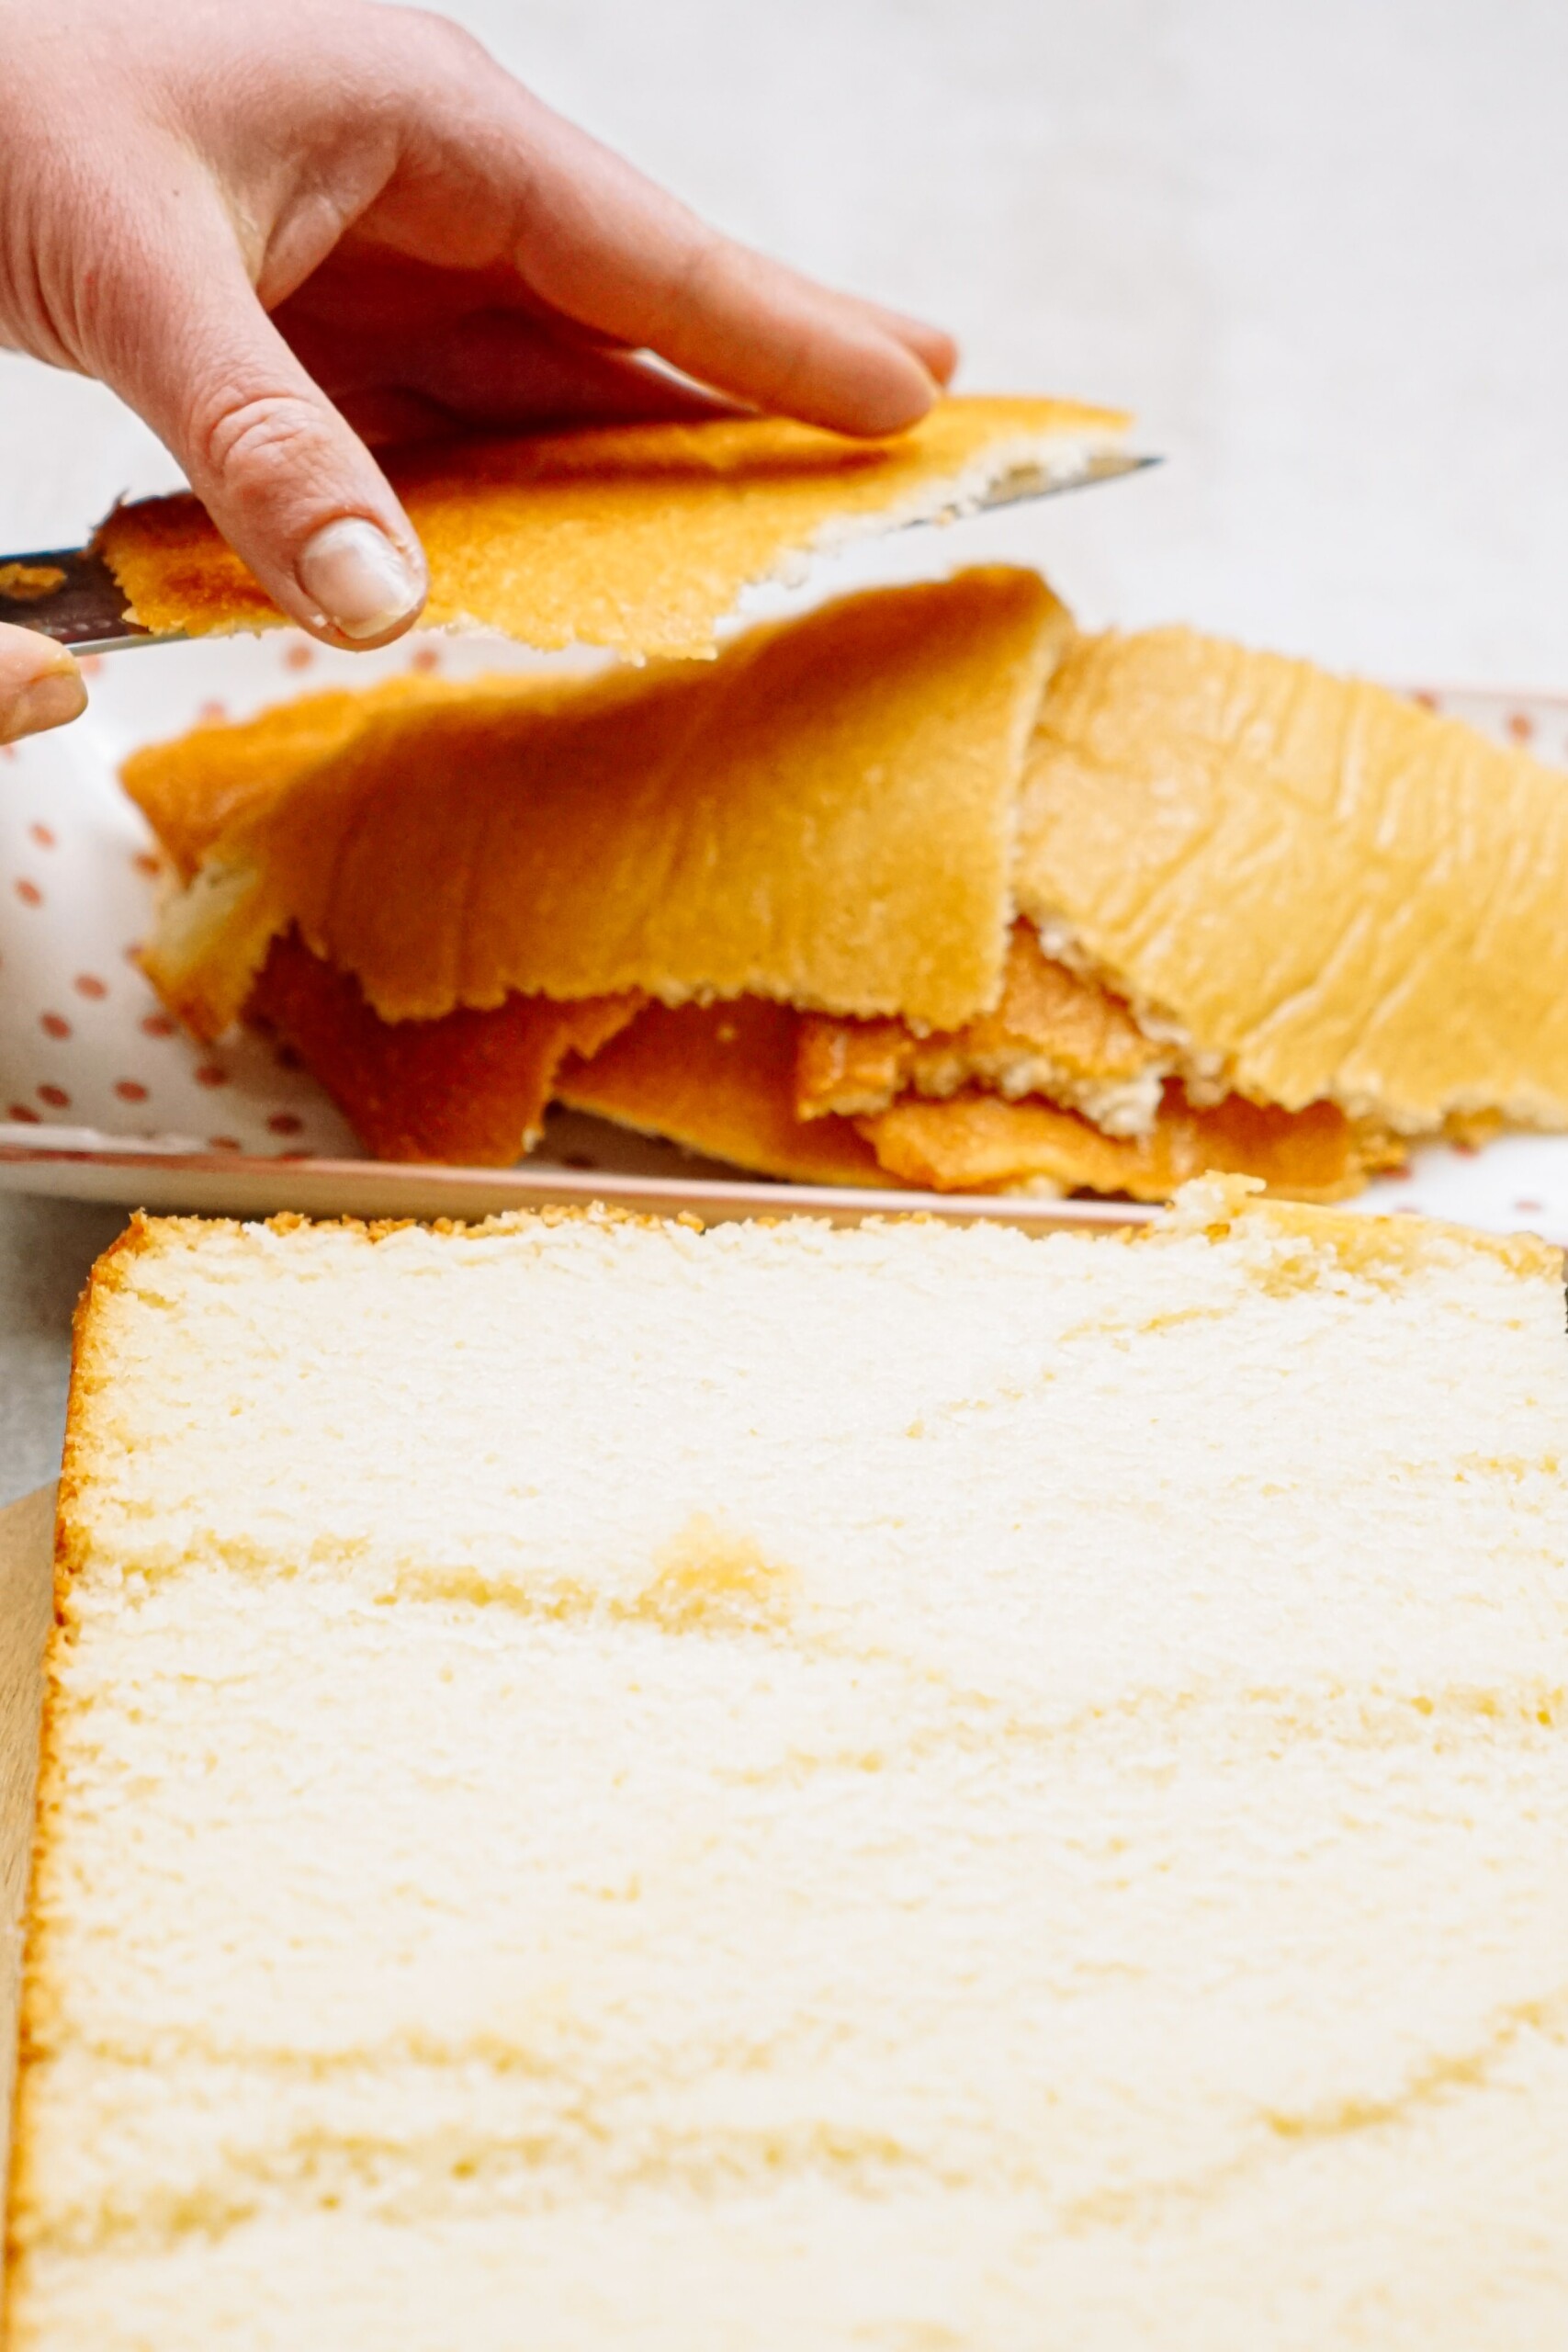 Trimming the top of a yellow cake to create a flat, even surface.